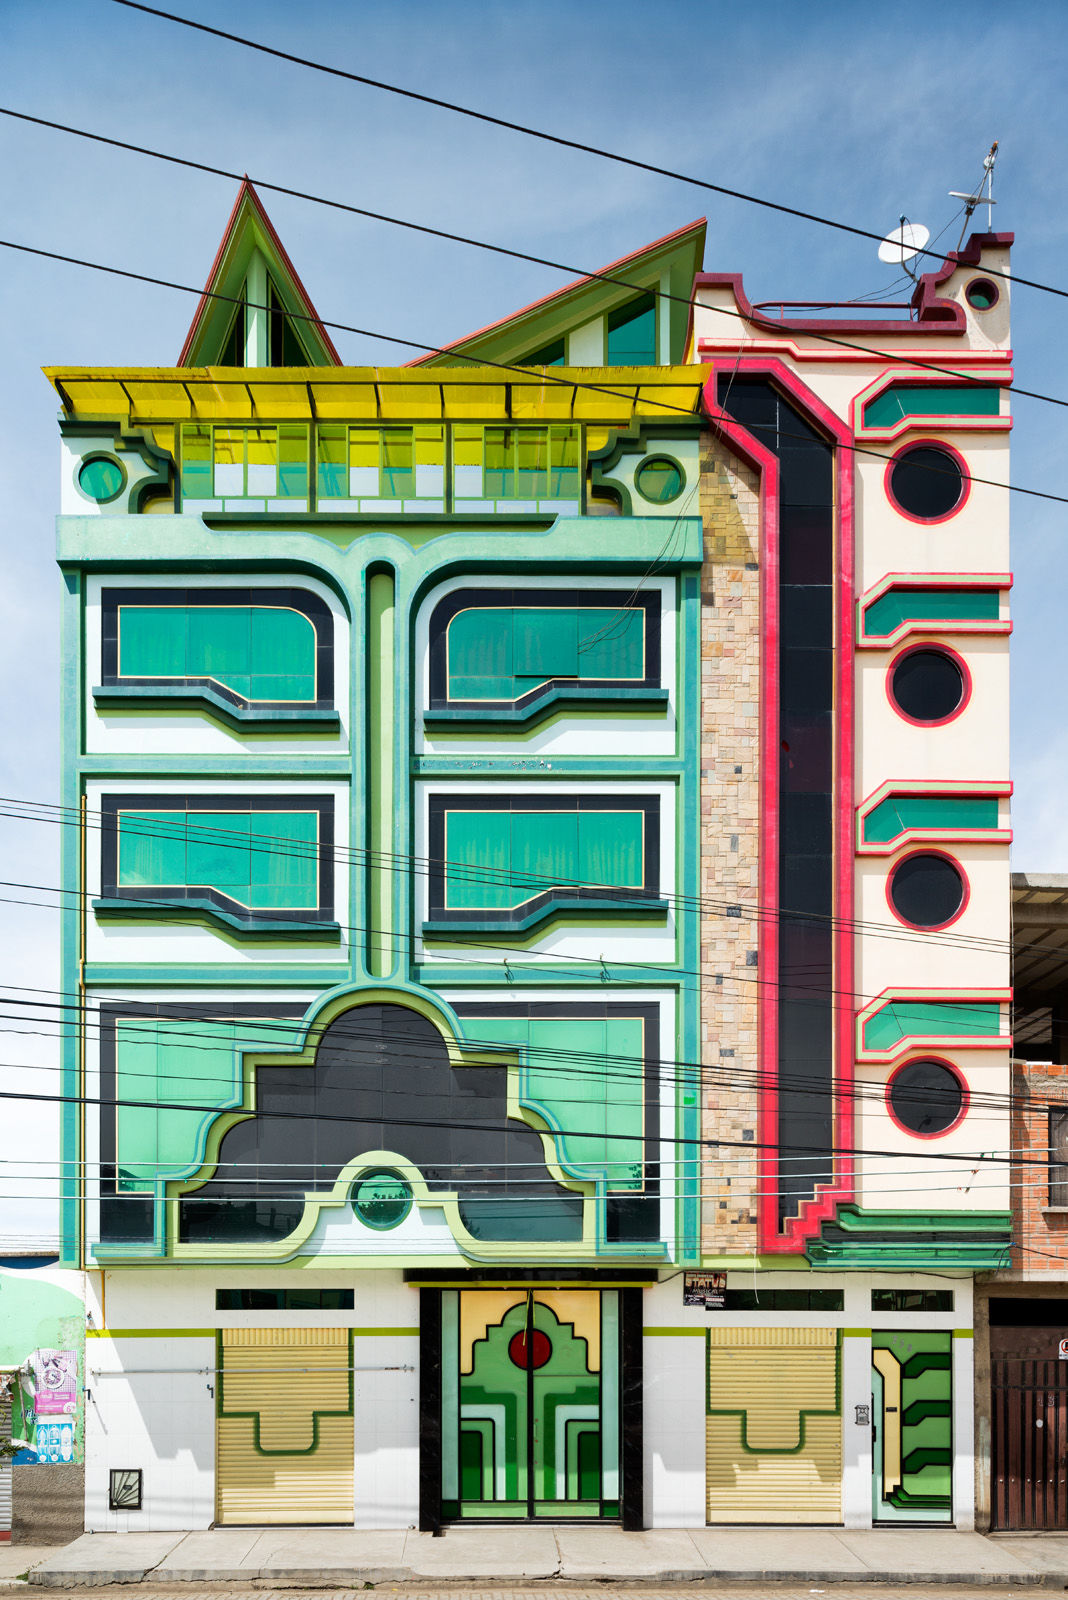 The Architect Transforming a Bolivian City through Colorful, Hand-Painted Designs